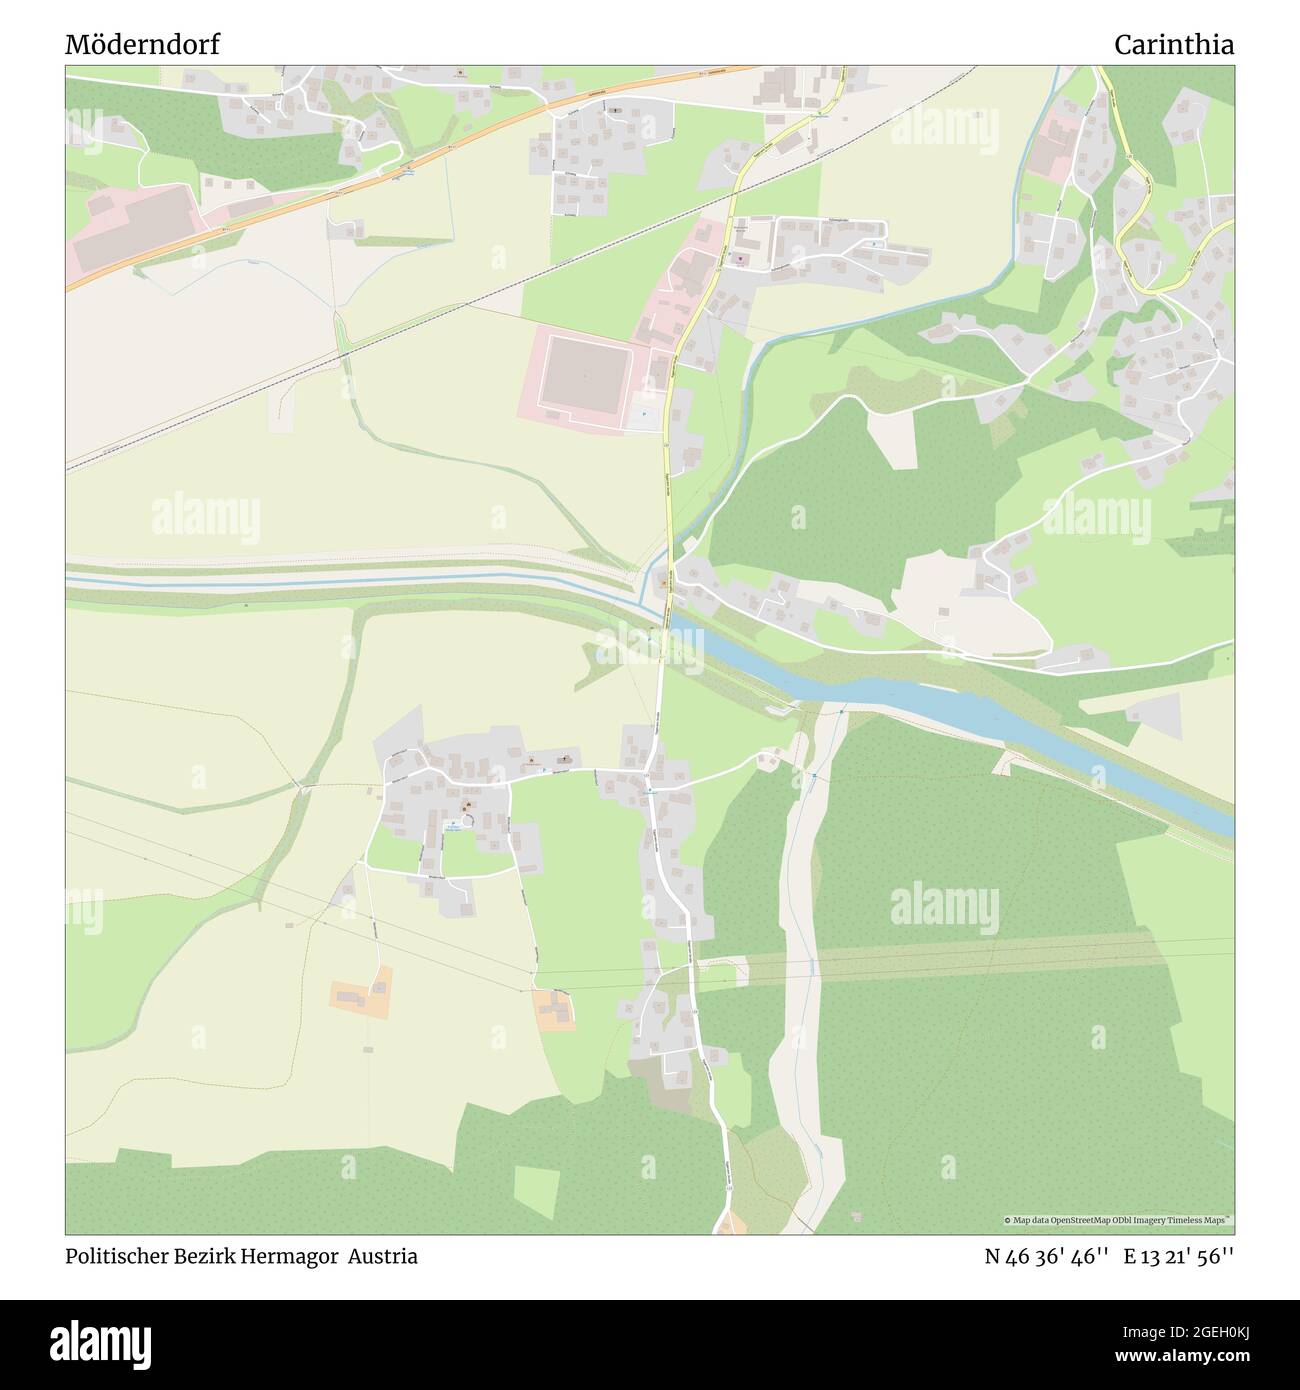 Möderndorf, Politischer Bezirk Hermagor, Austria, Carinthia, N 46 36' 46'', E 13 21' 56'', map, Timeless Map published in 2021. Travelers, explorers and adventurers like Florence Nightingale, David Livingstone, Ernest Shackleton, Lewis and Clark and Sherlock Holmes relied on maps to plan travels to the world's most remote corners, Timeless Maps is mapping most locations on the globe, showing the achievement of great dreams Stock Photo